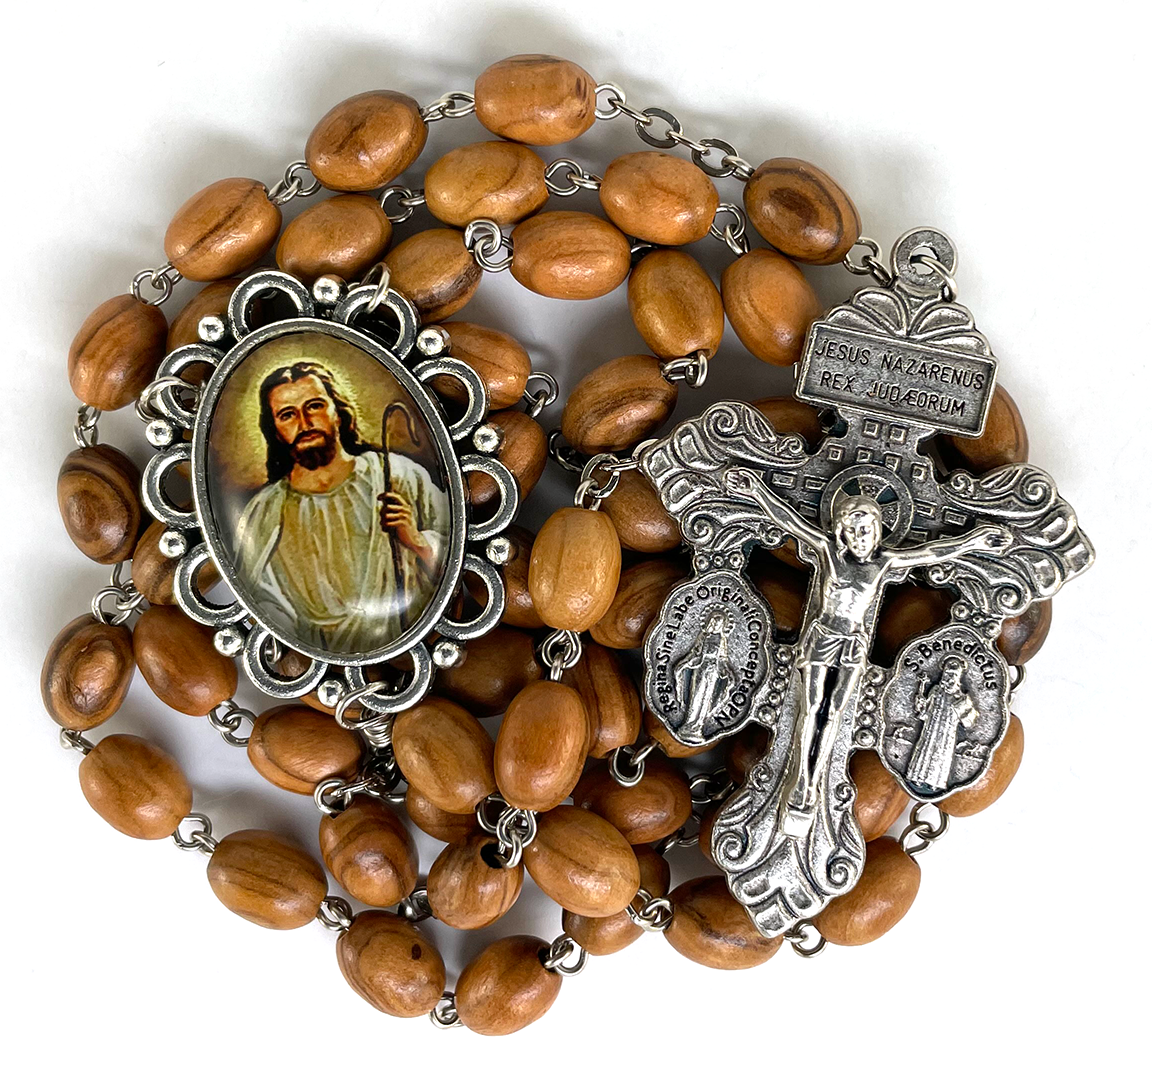 3 Tips for Choosing a Rosary That is Right for You